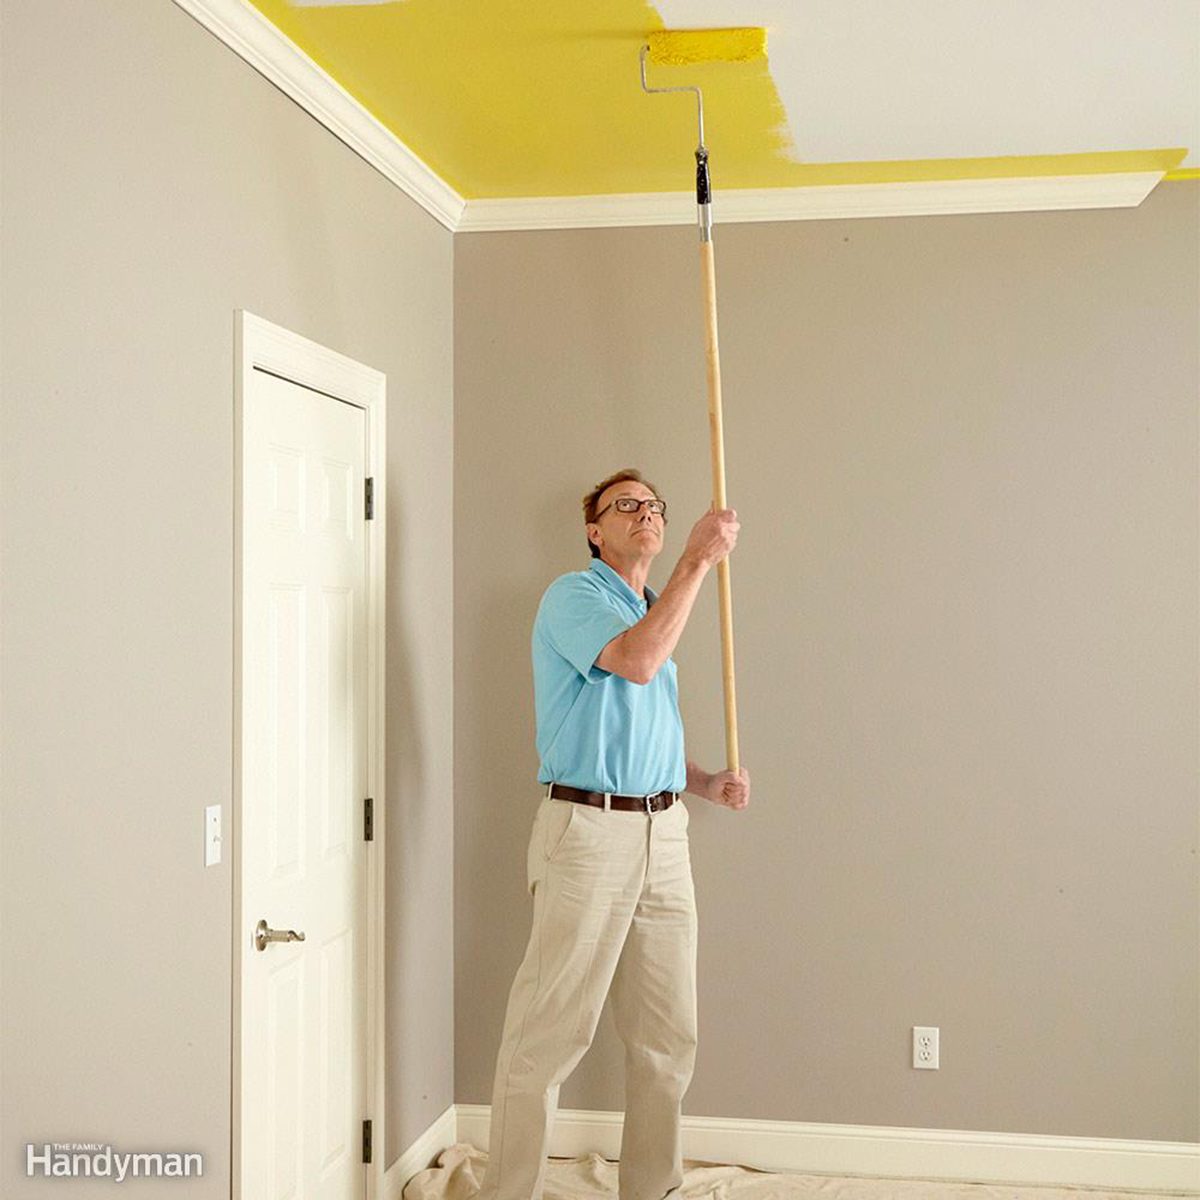 Painting the ceiling yellow with a long roller